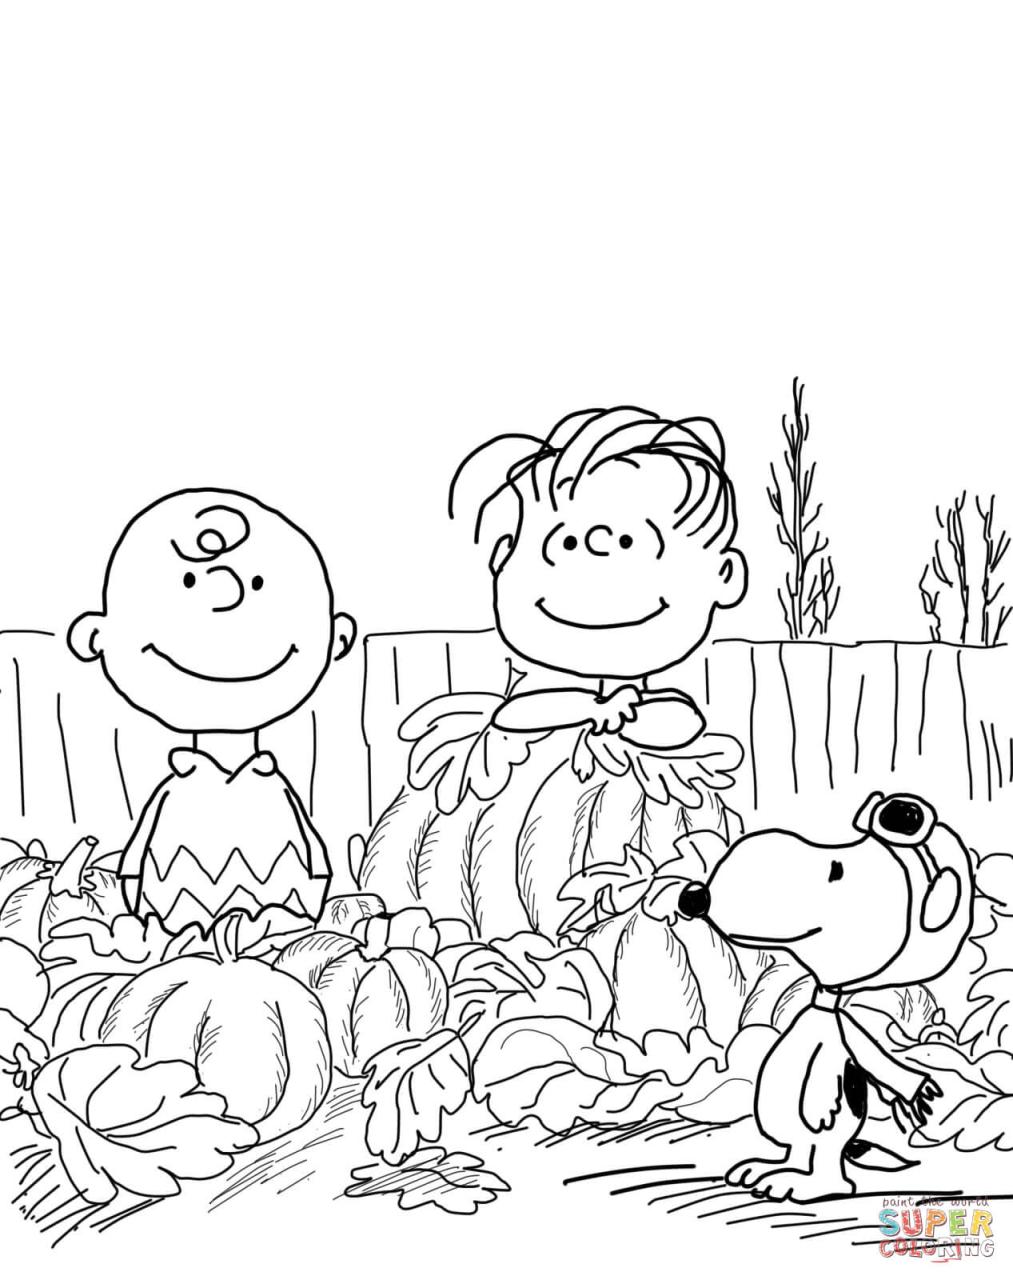 Download snoopy and spooky halloween pictures to color and draw Happy